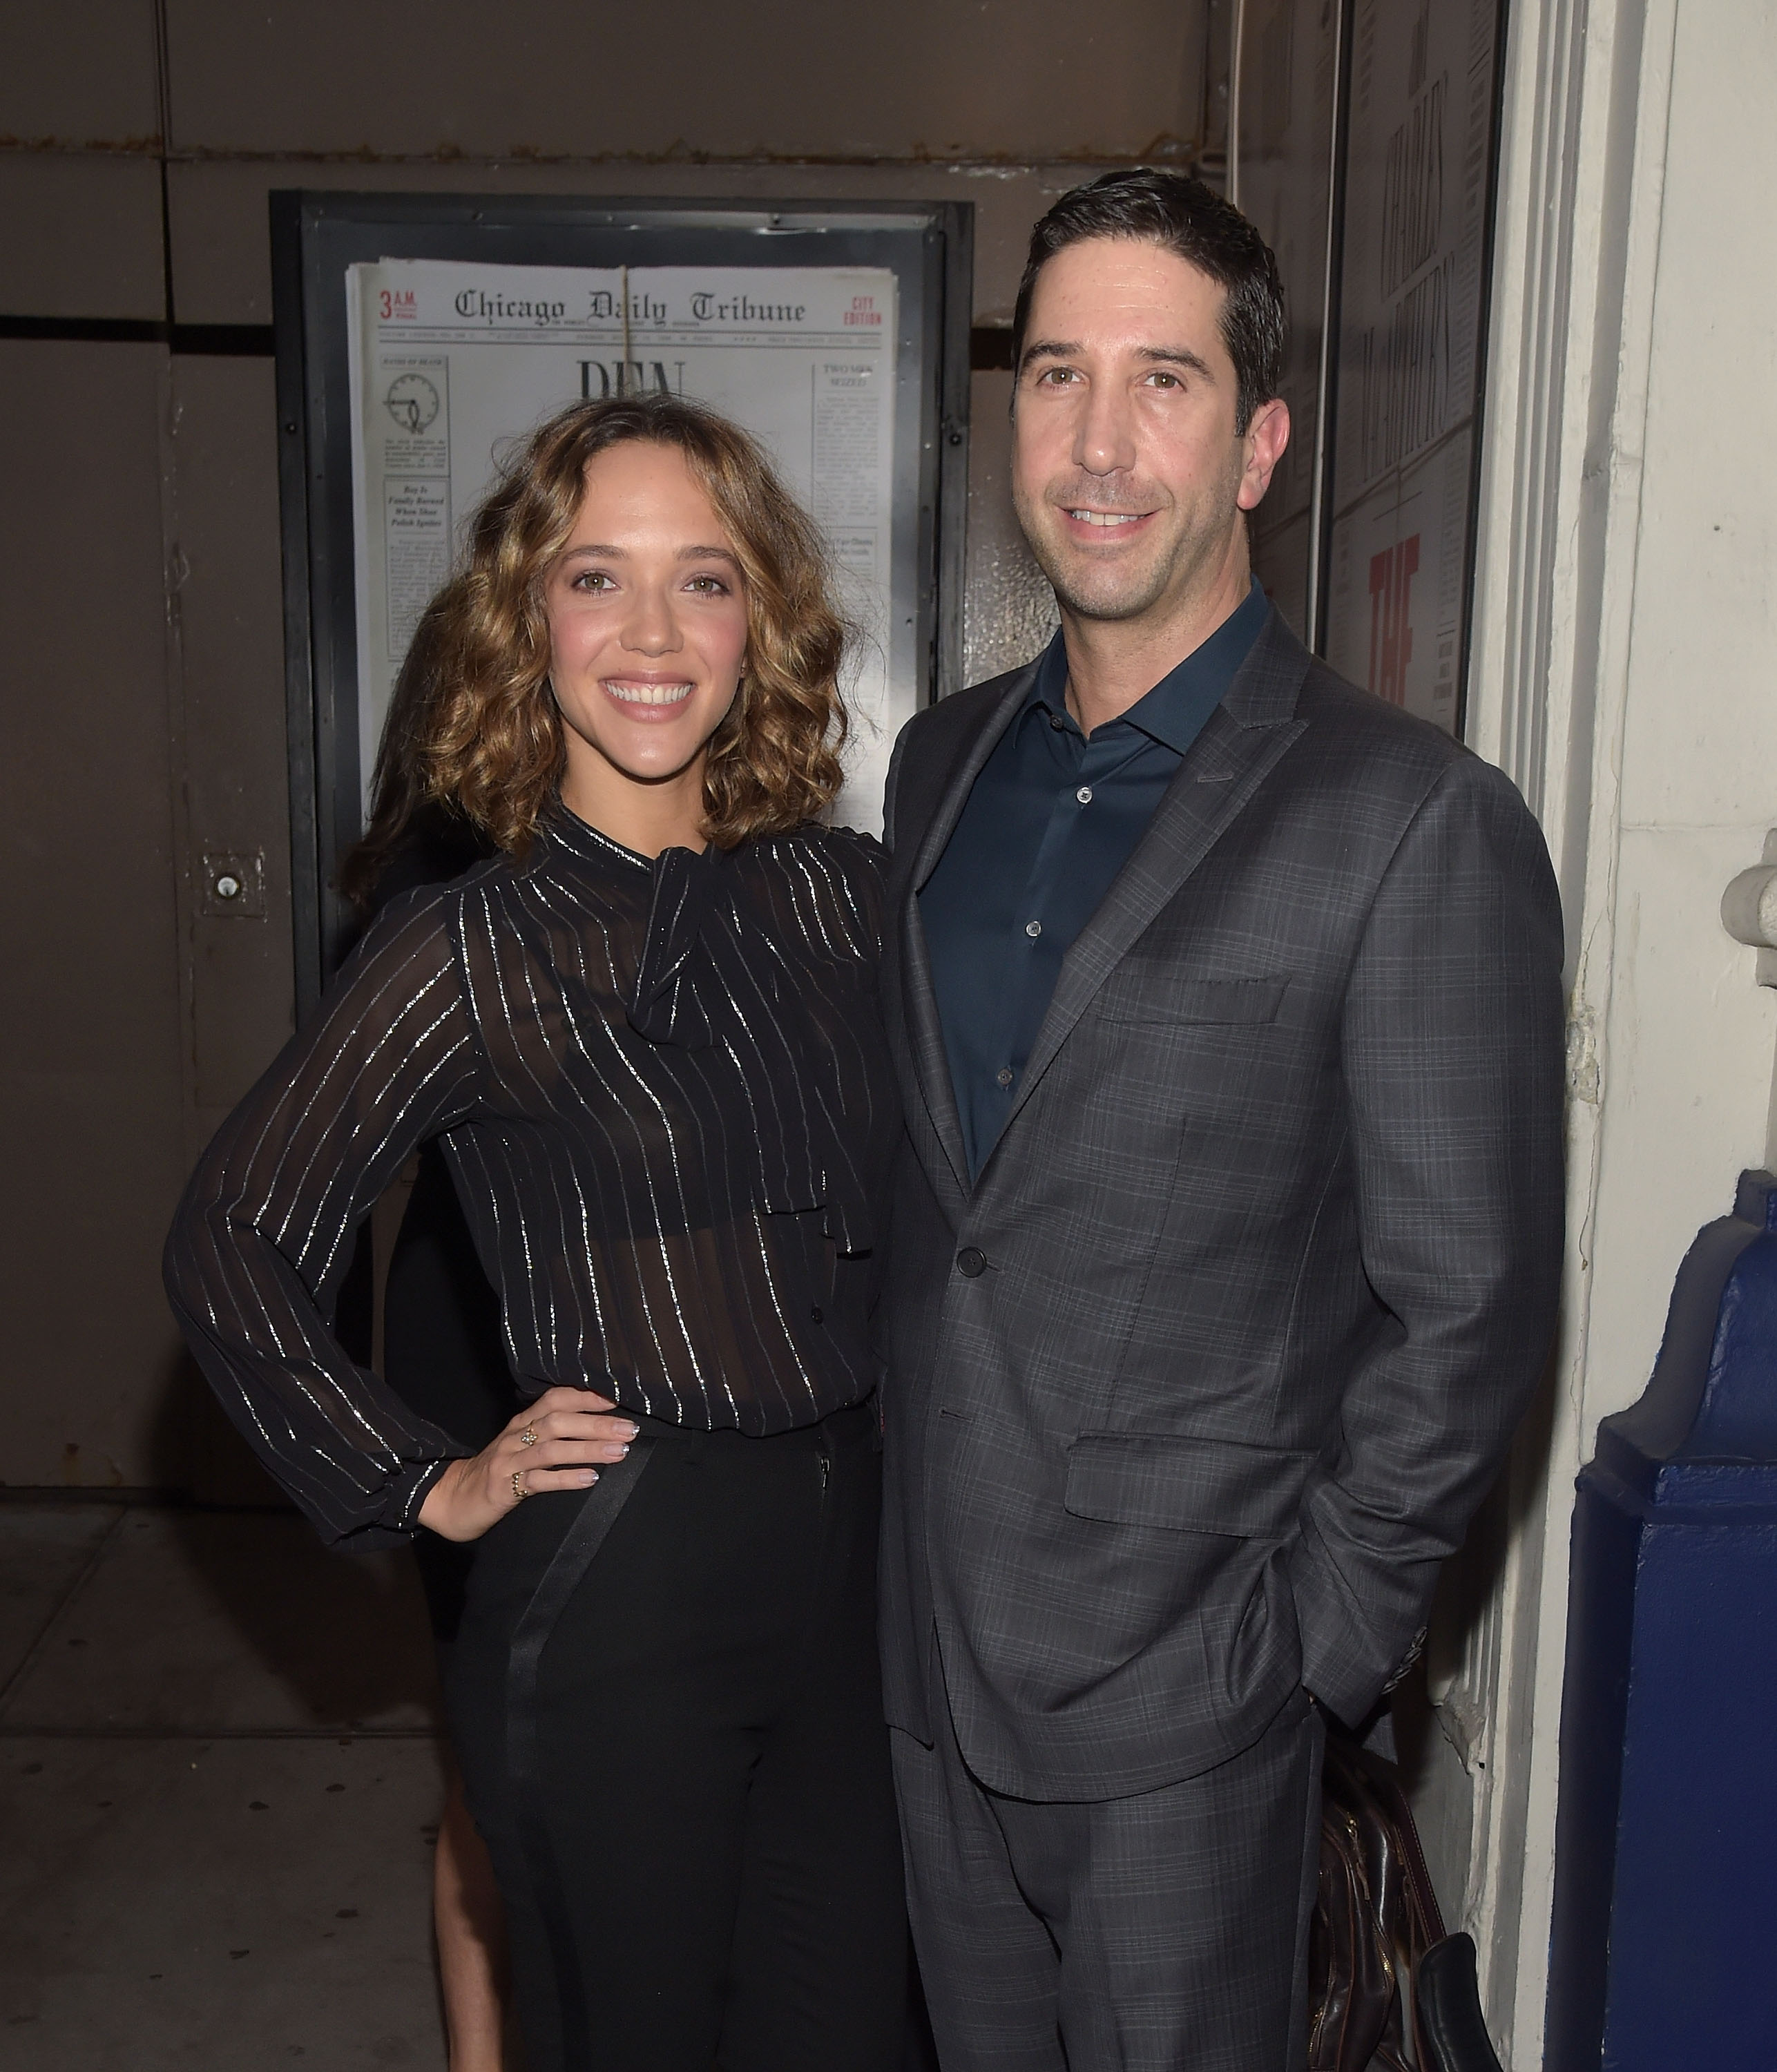 Zoë Buckman and David Schwimmer attend the "The Front Page" Broadway Opening Night at The Broadhurst Theatre on October 20, 2016, in New York City. | Source: Getty Images